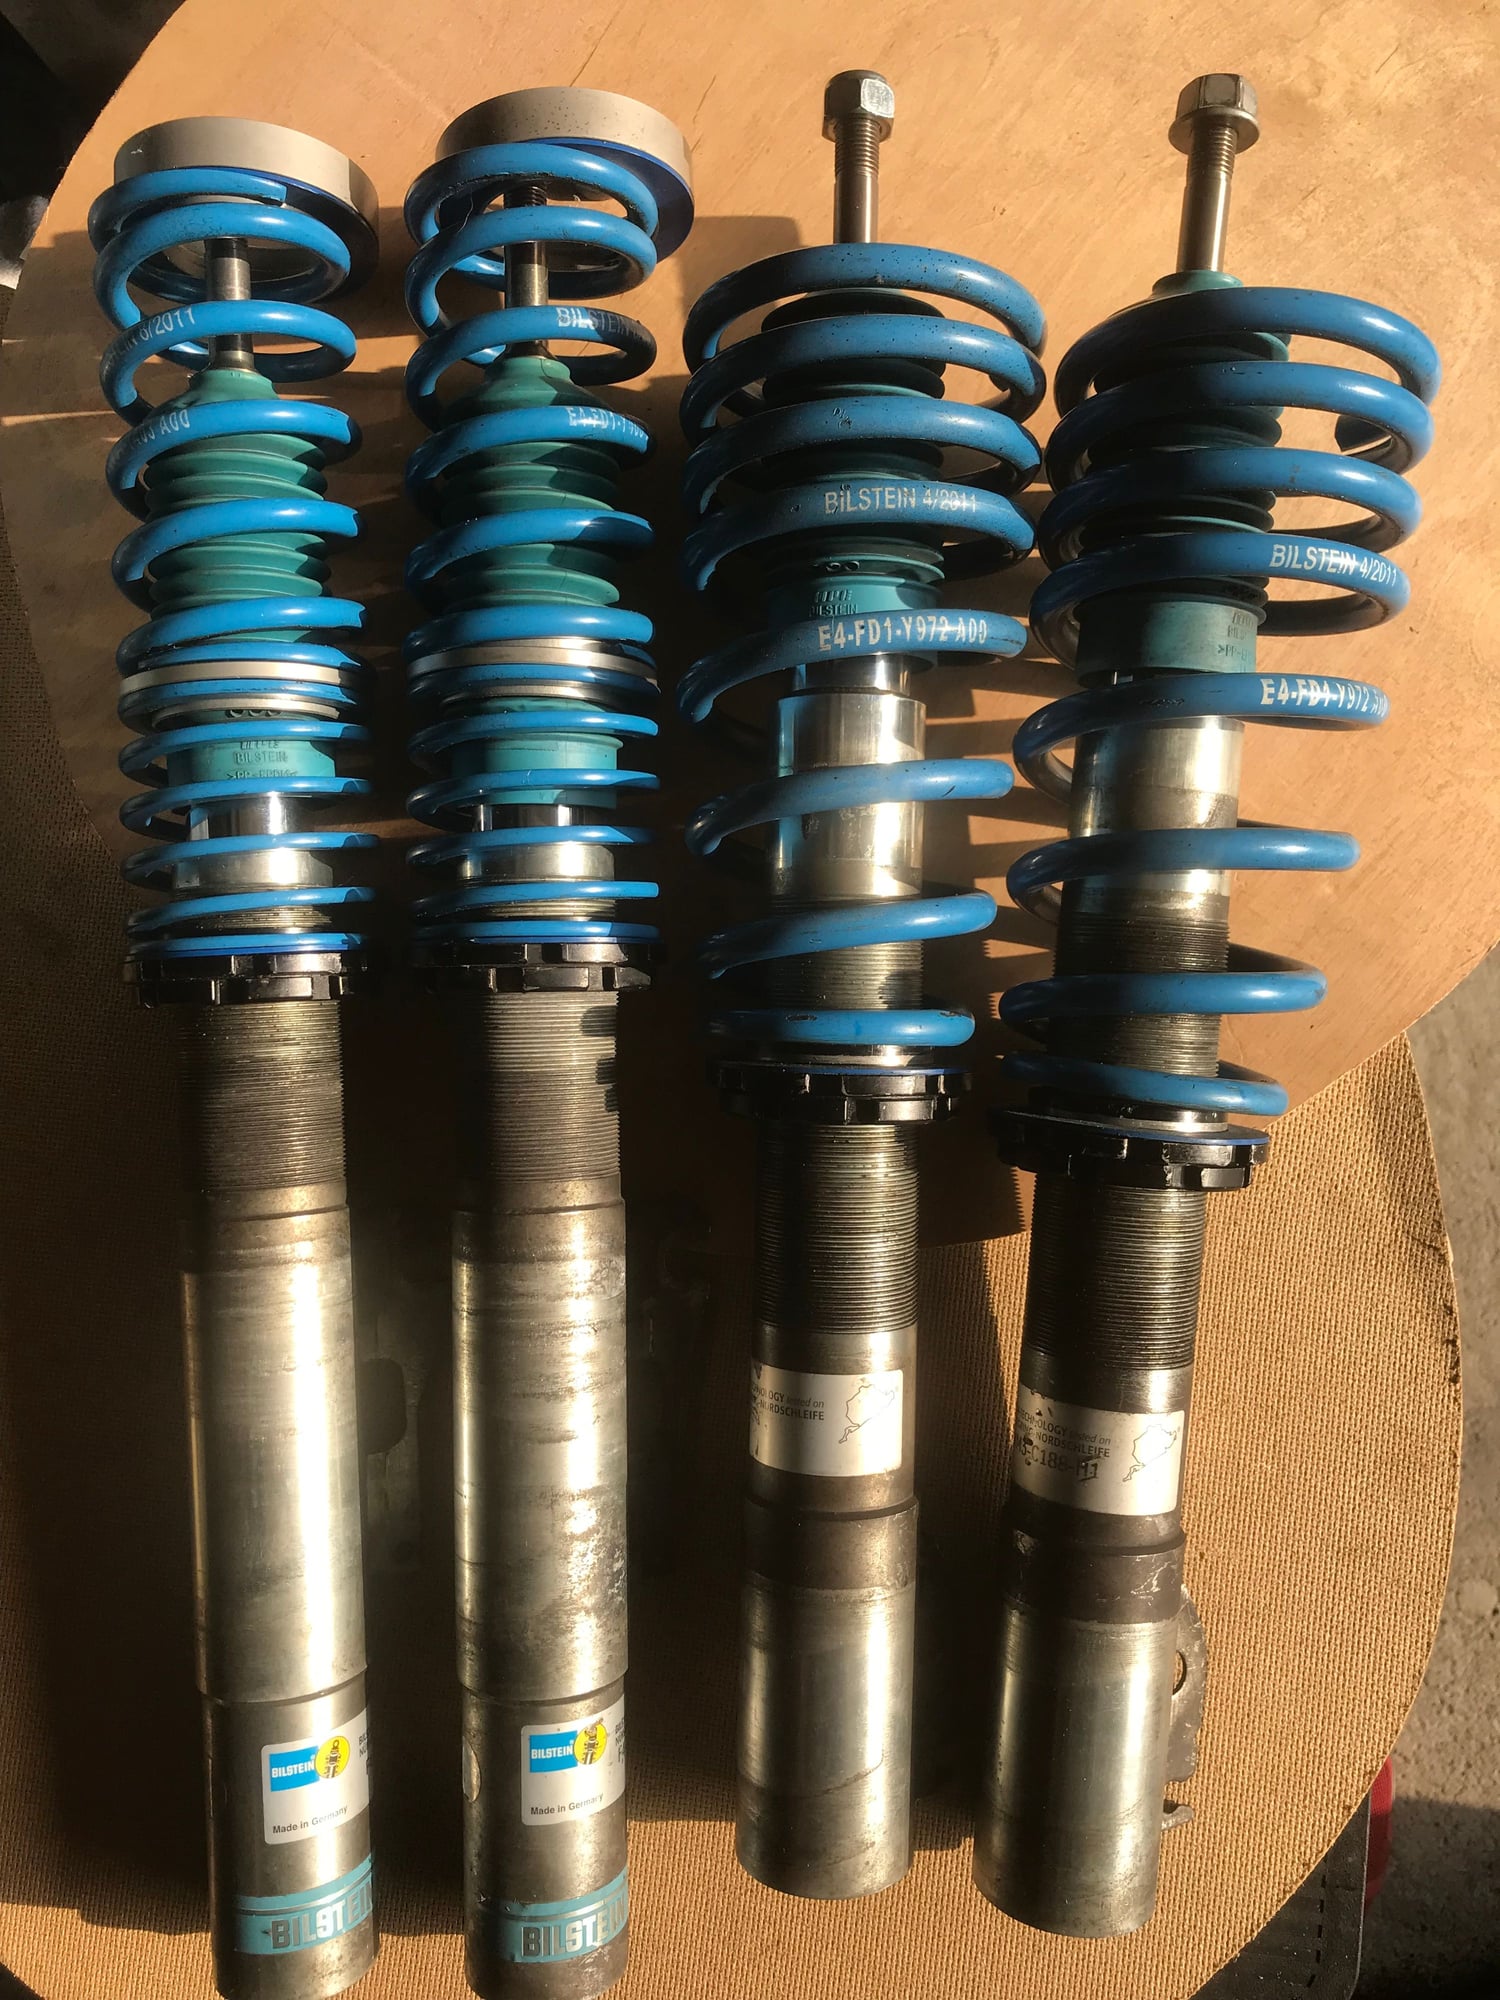 Steering/Suspension - Bilstein PSS9 Kit for 987 - Used - 2006 to 2012 Porsche Boxster - 2006 to 2012 Porsche Cayman - Toronto, ON L4J5N3, Canada